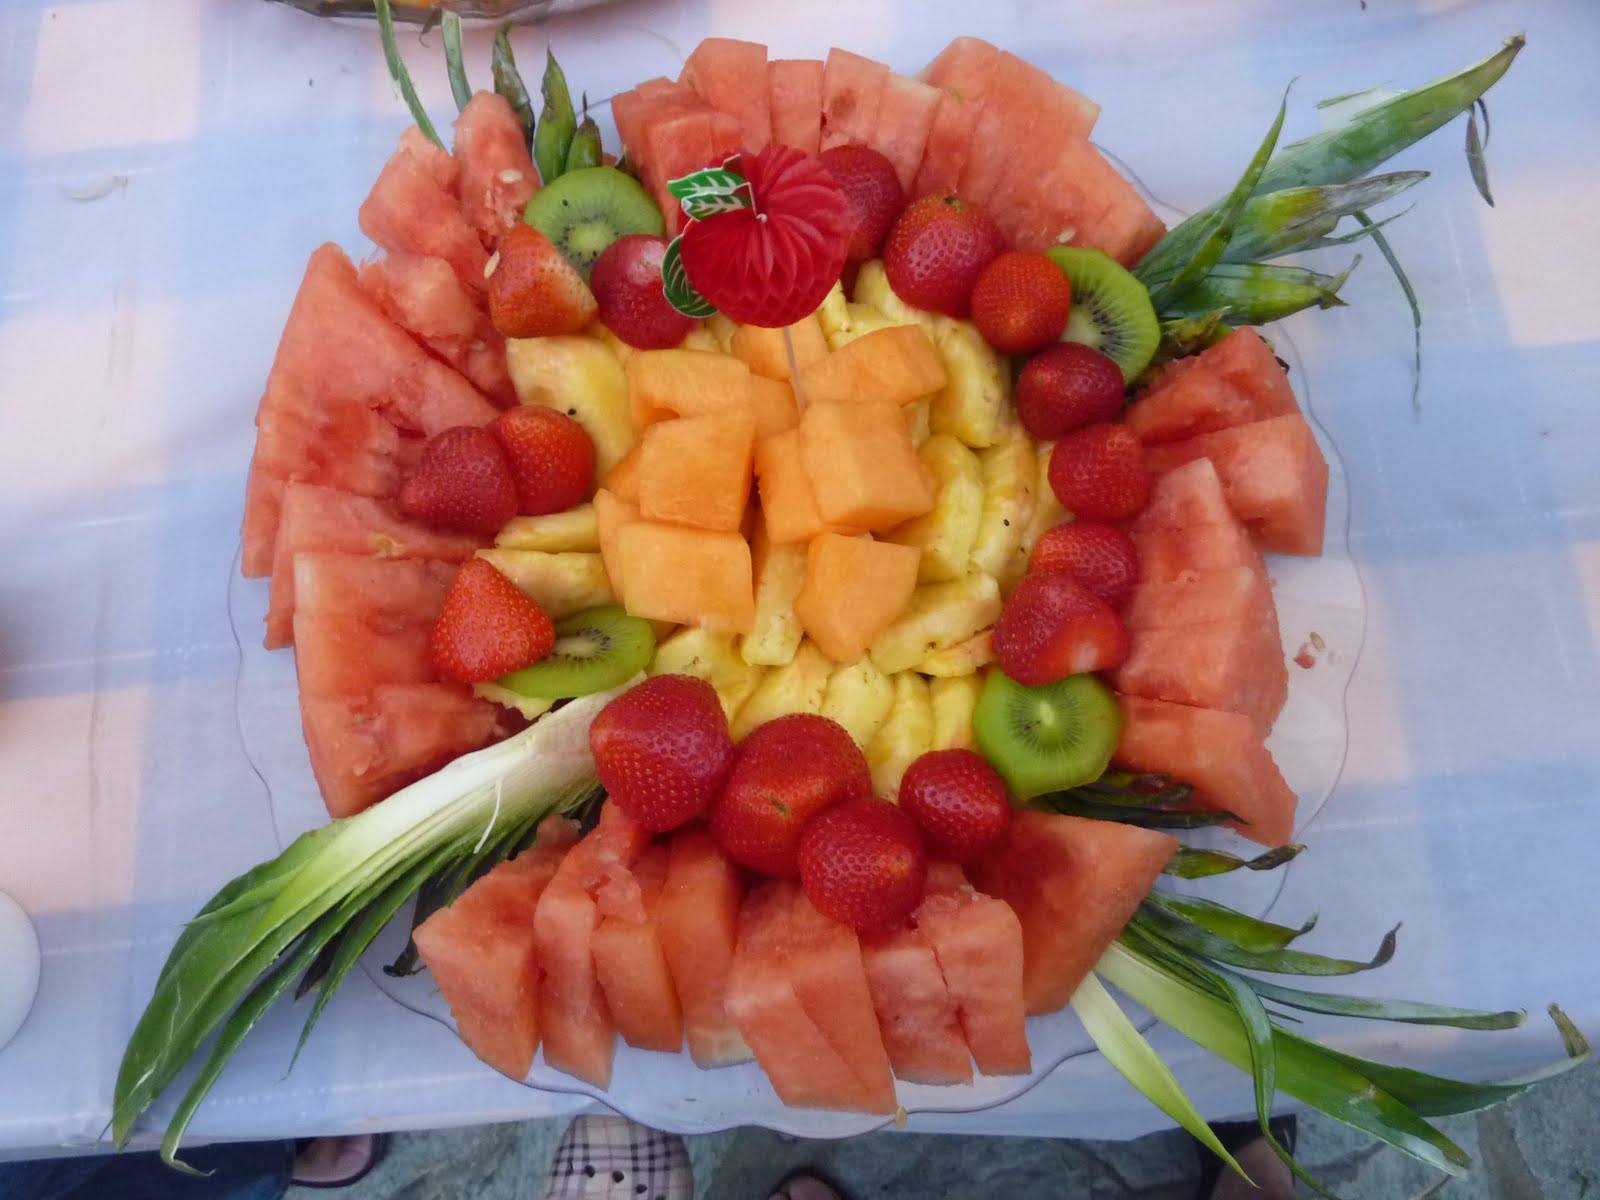 Trace my footsteps: Creating A Fruit Platter